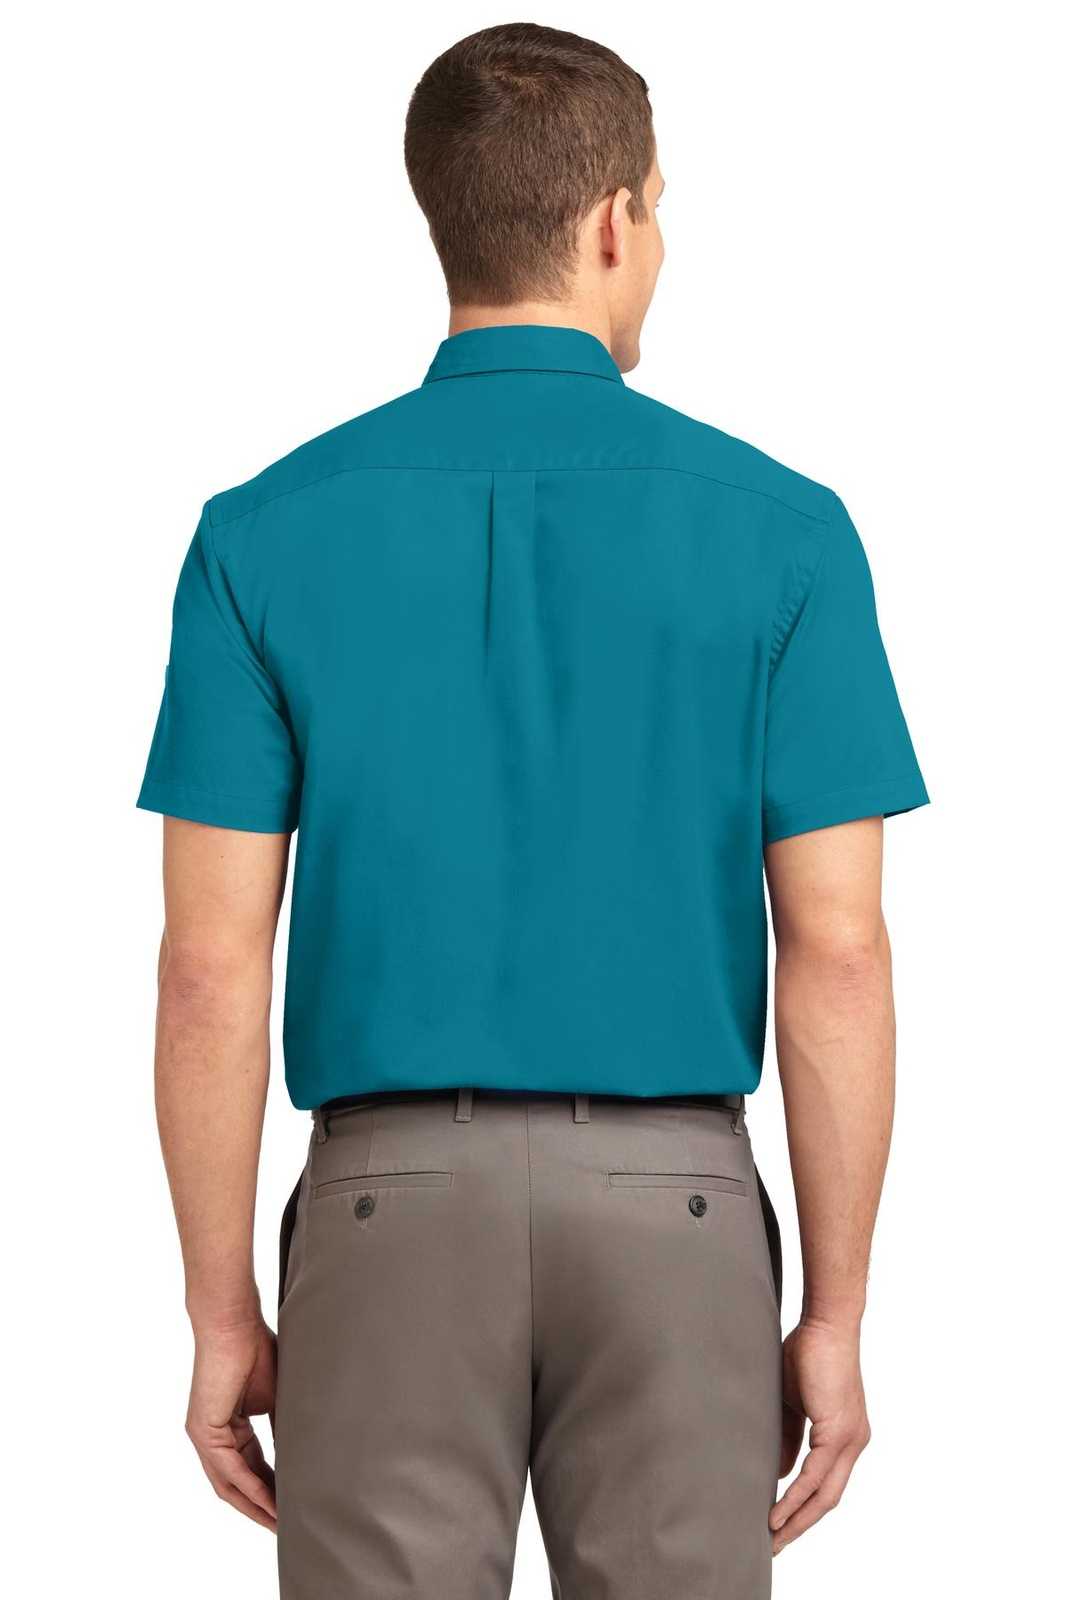 Port Authority S508 Short Sleeve Easy Care Shirt - Teal Green - HIT a Double - 2